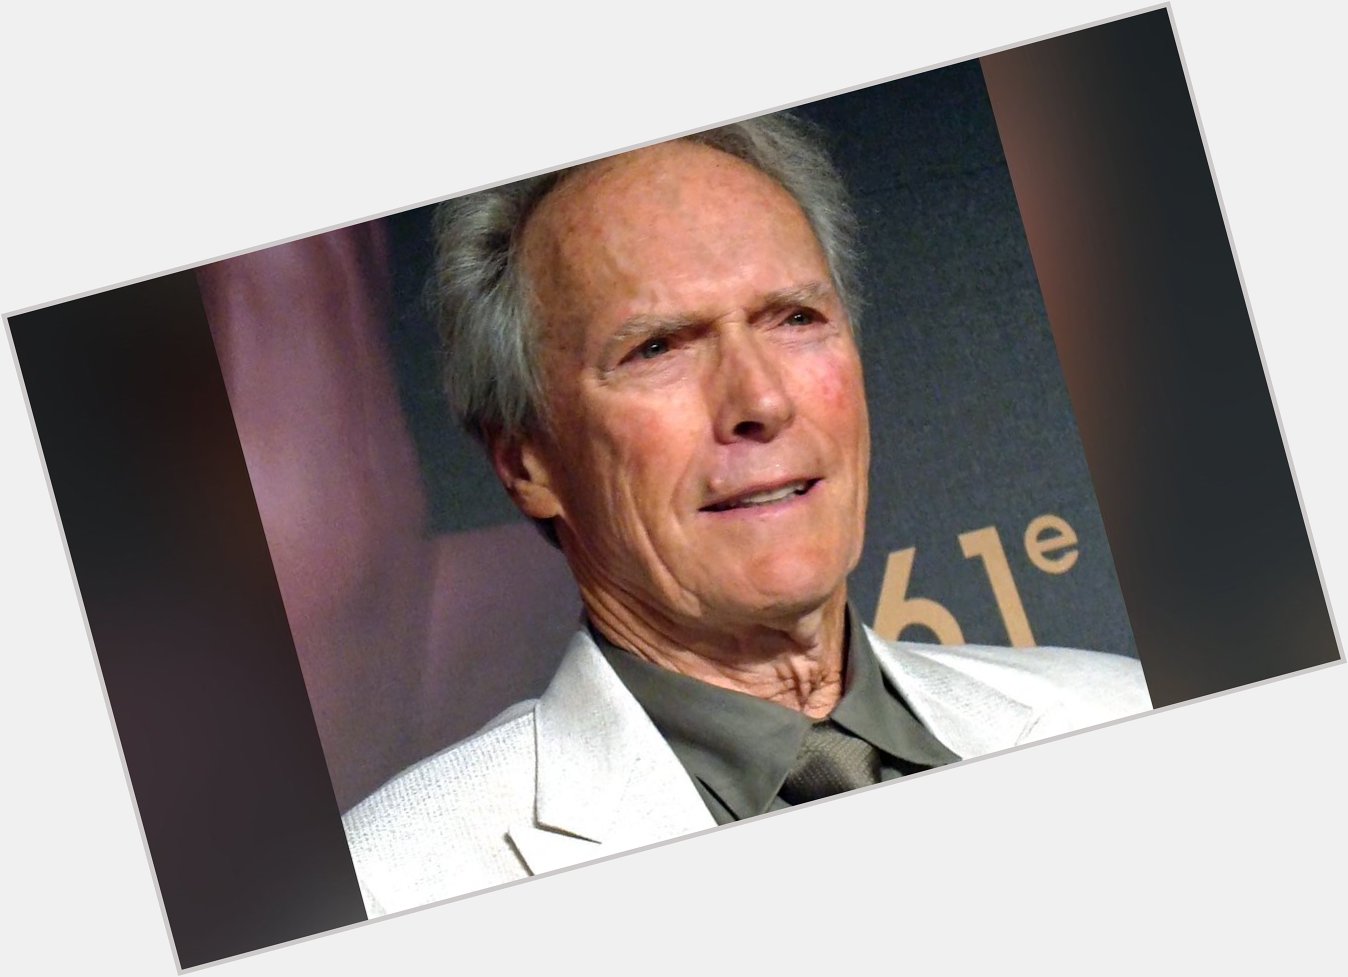 Happy birthday, Clint Eastwood! The Hollywood legend turns 87 today! 